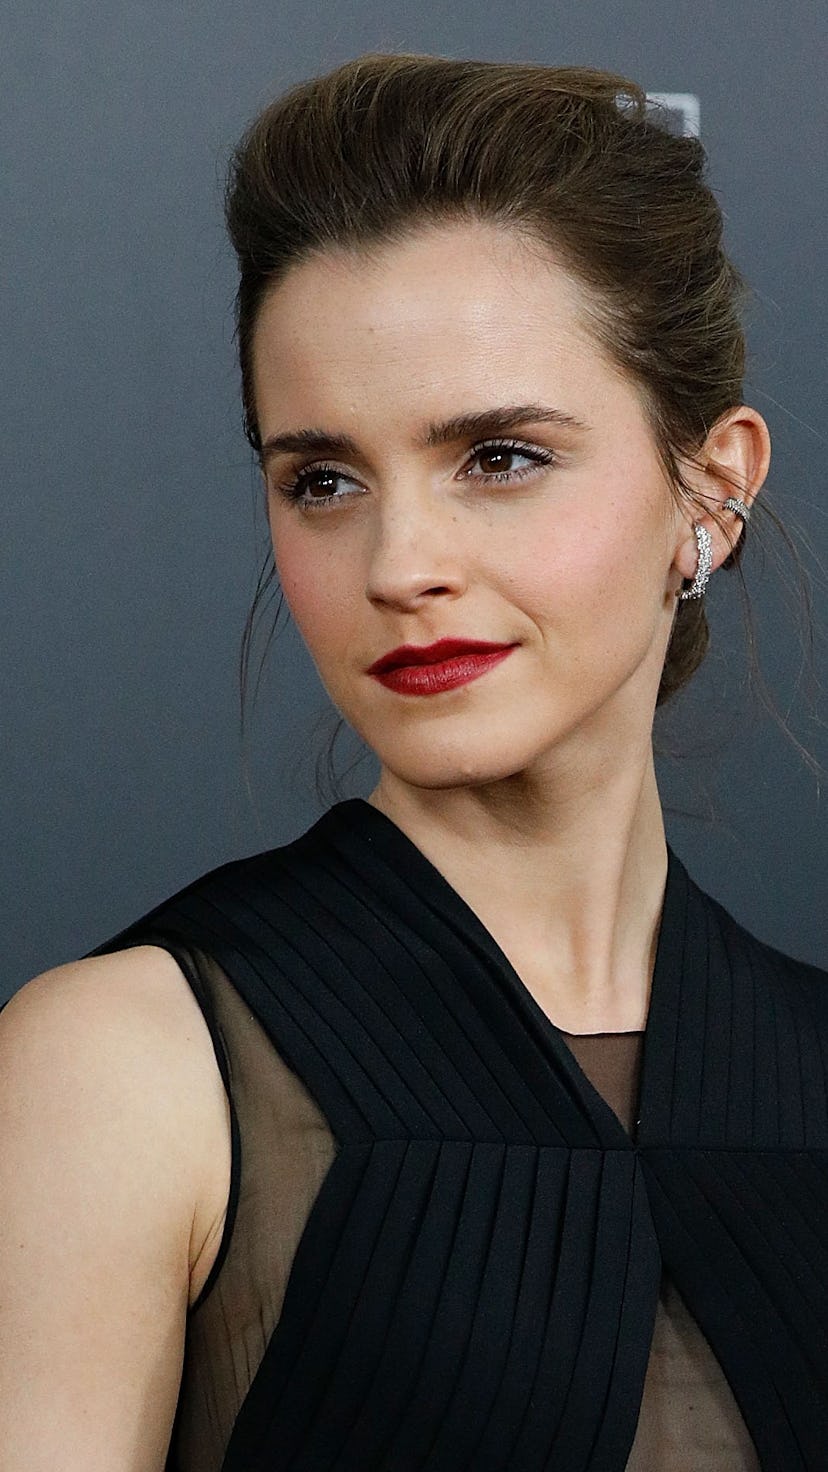 Emma Watson Beauty And The Beast Red Carpet